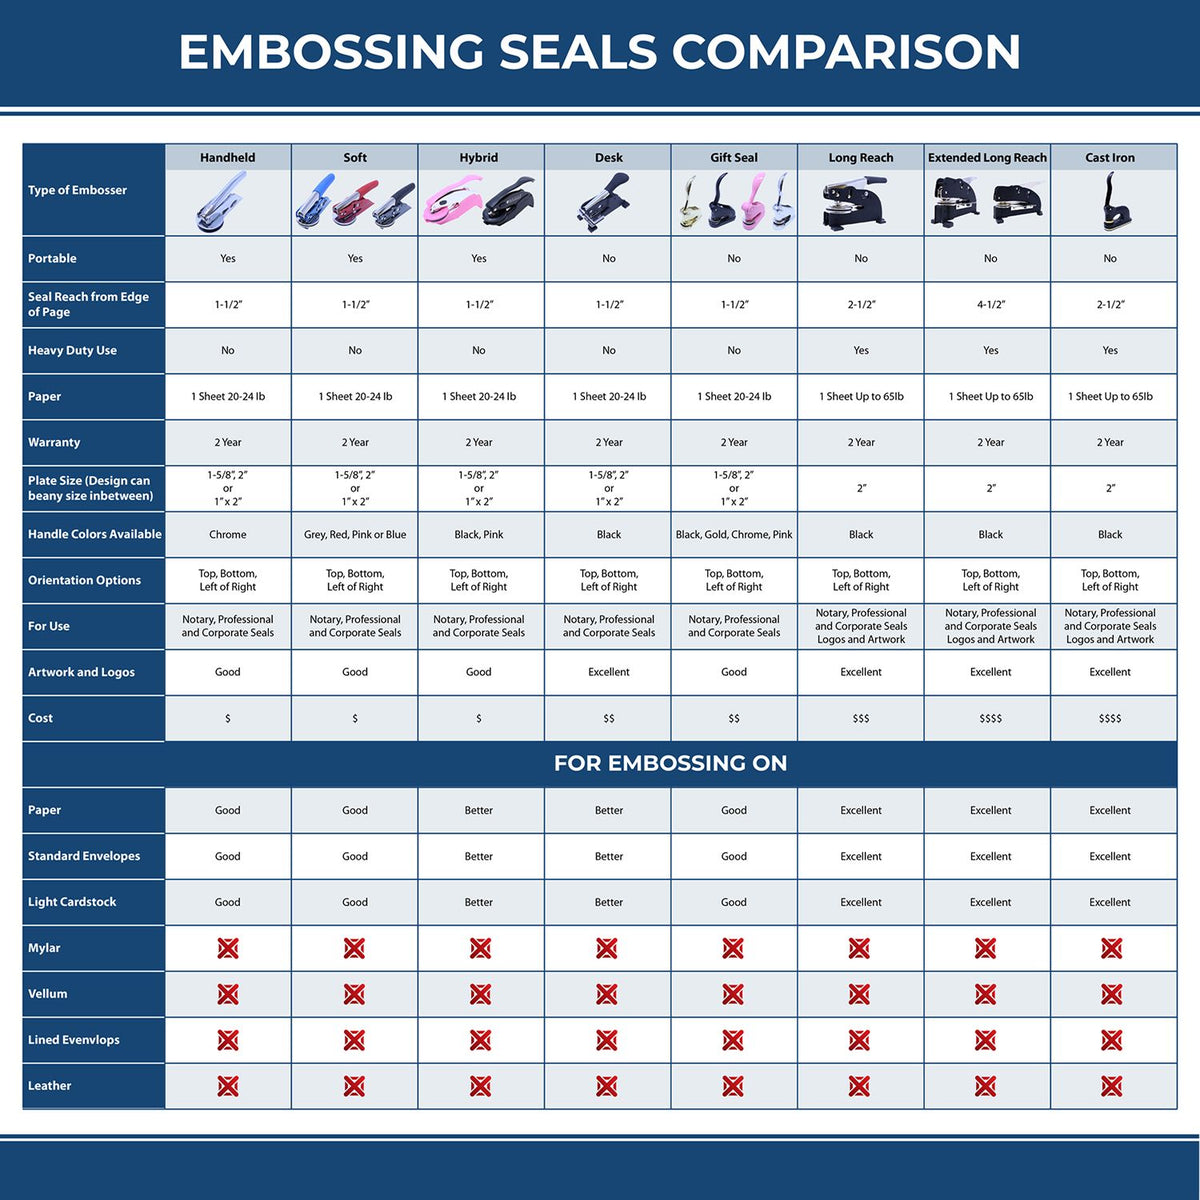 A comparison chart for the different types of mount models available for the Handheld Ohio Professional Engineer Embosser.